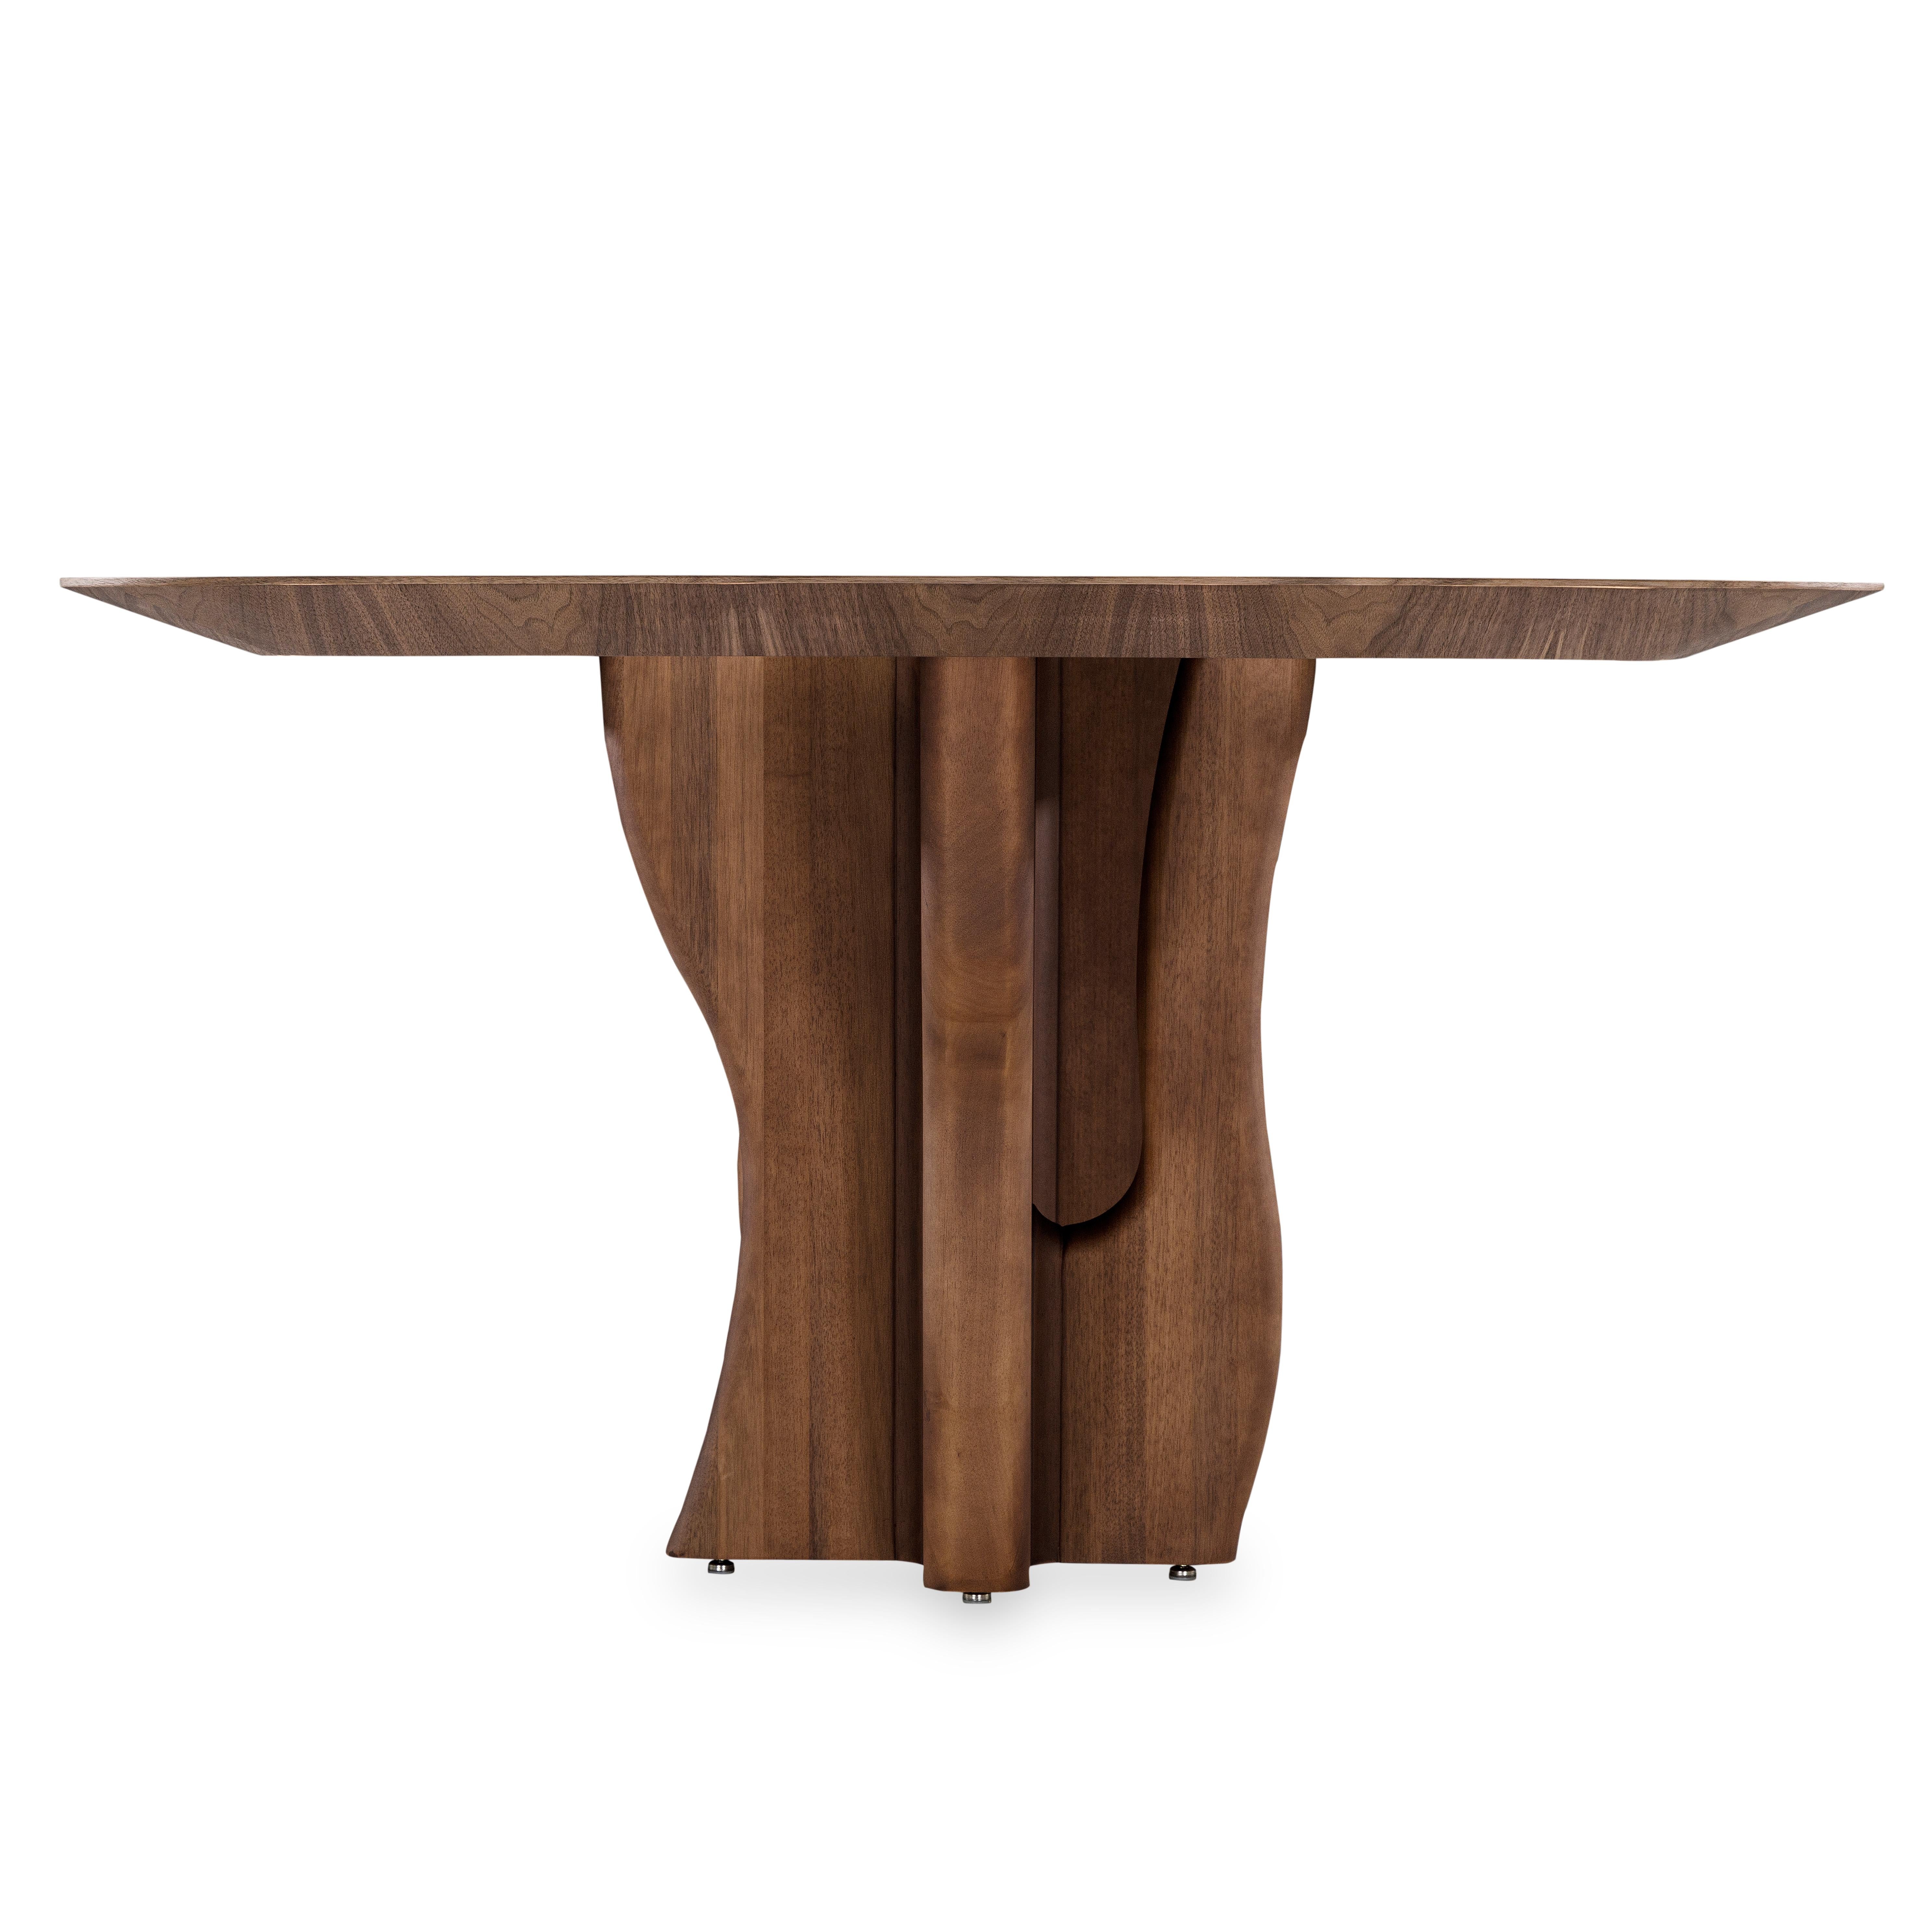 Contemporary Suma Dining Table with Walnut Veneered Top and Organic Solid Wood Legs 86'' For Sale